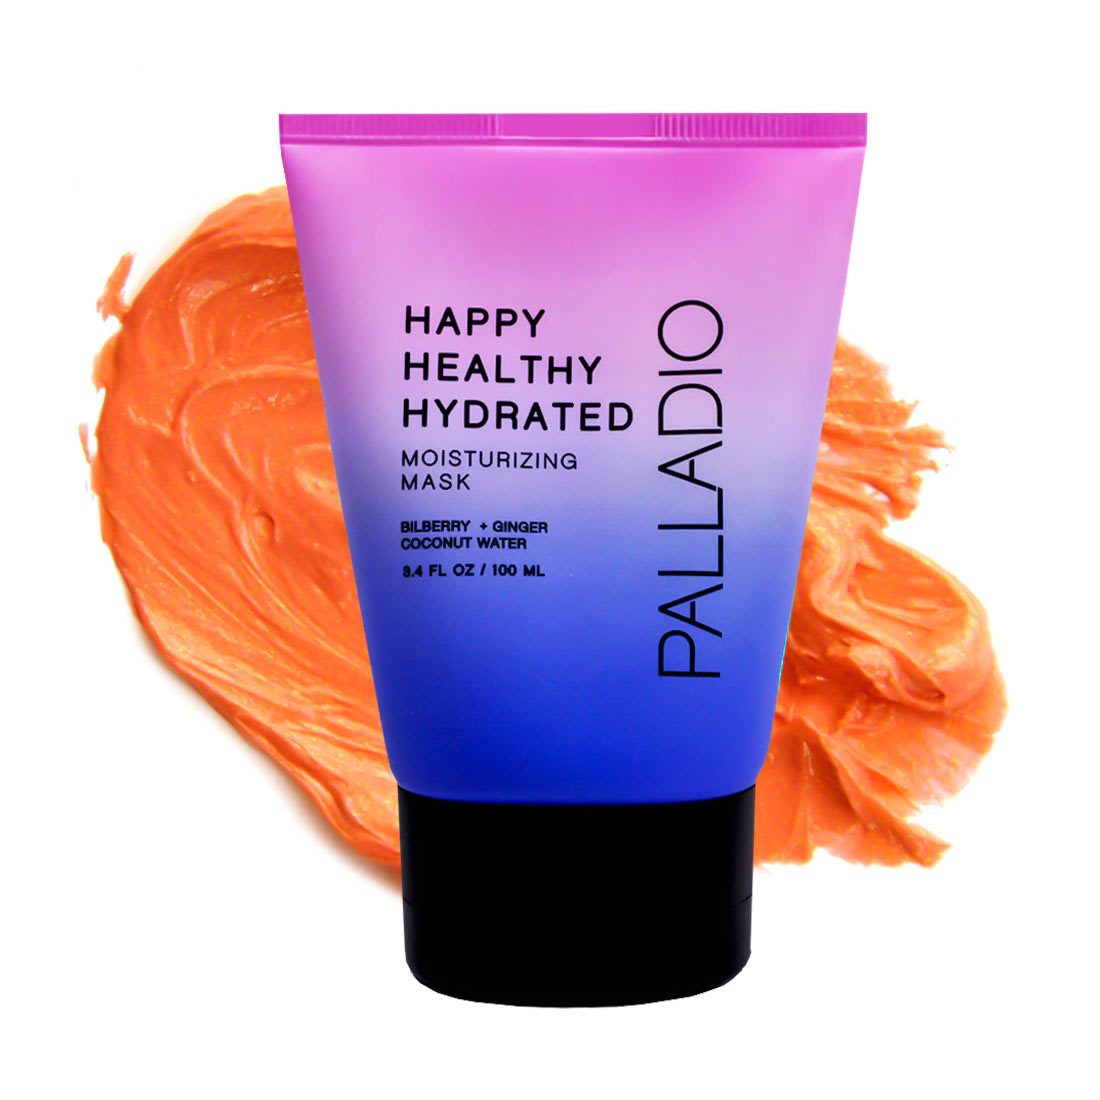 HAPPY HEALTHY HYDRATED MOISTURIZING FACE MASK